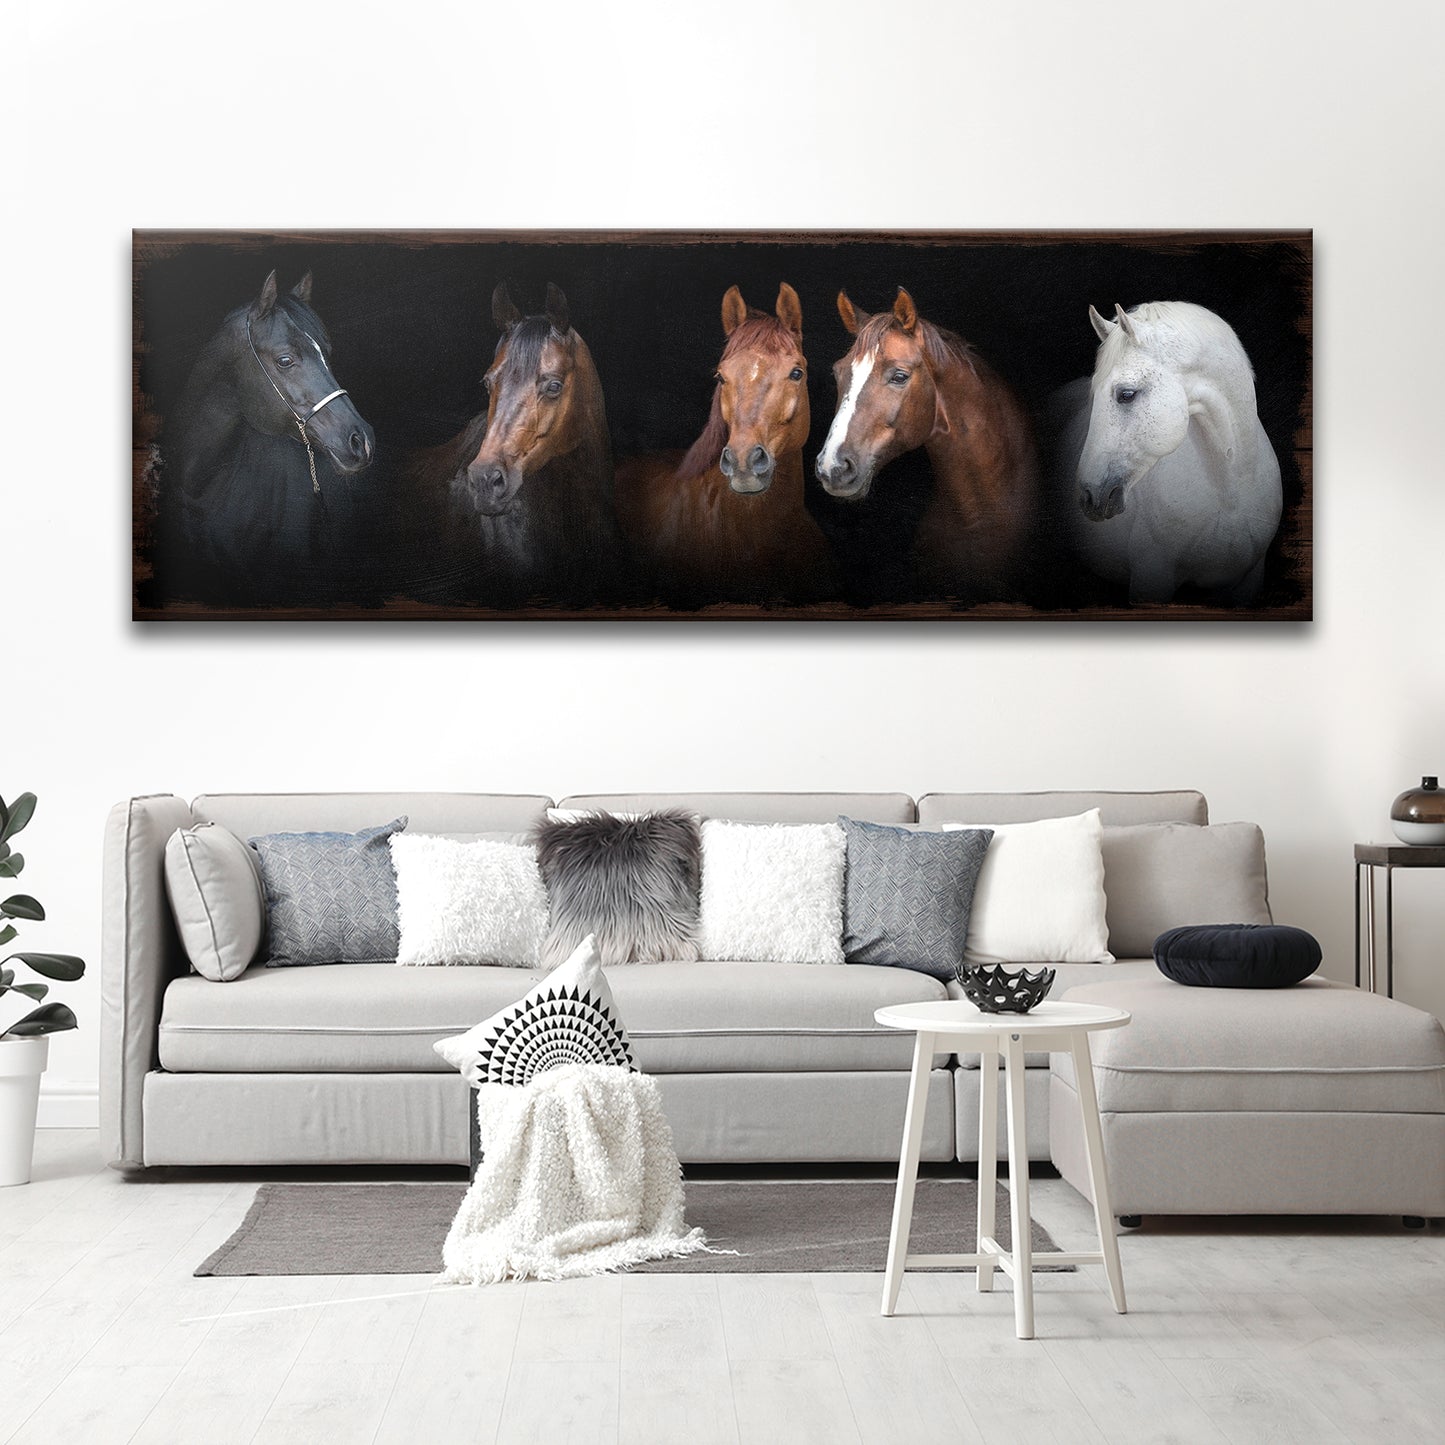 A Family of Horses - Image by Tailored Canvases